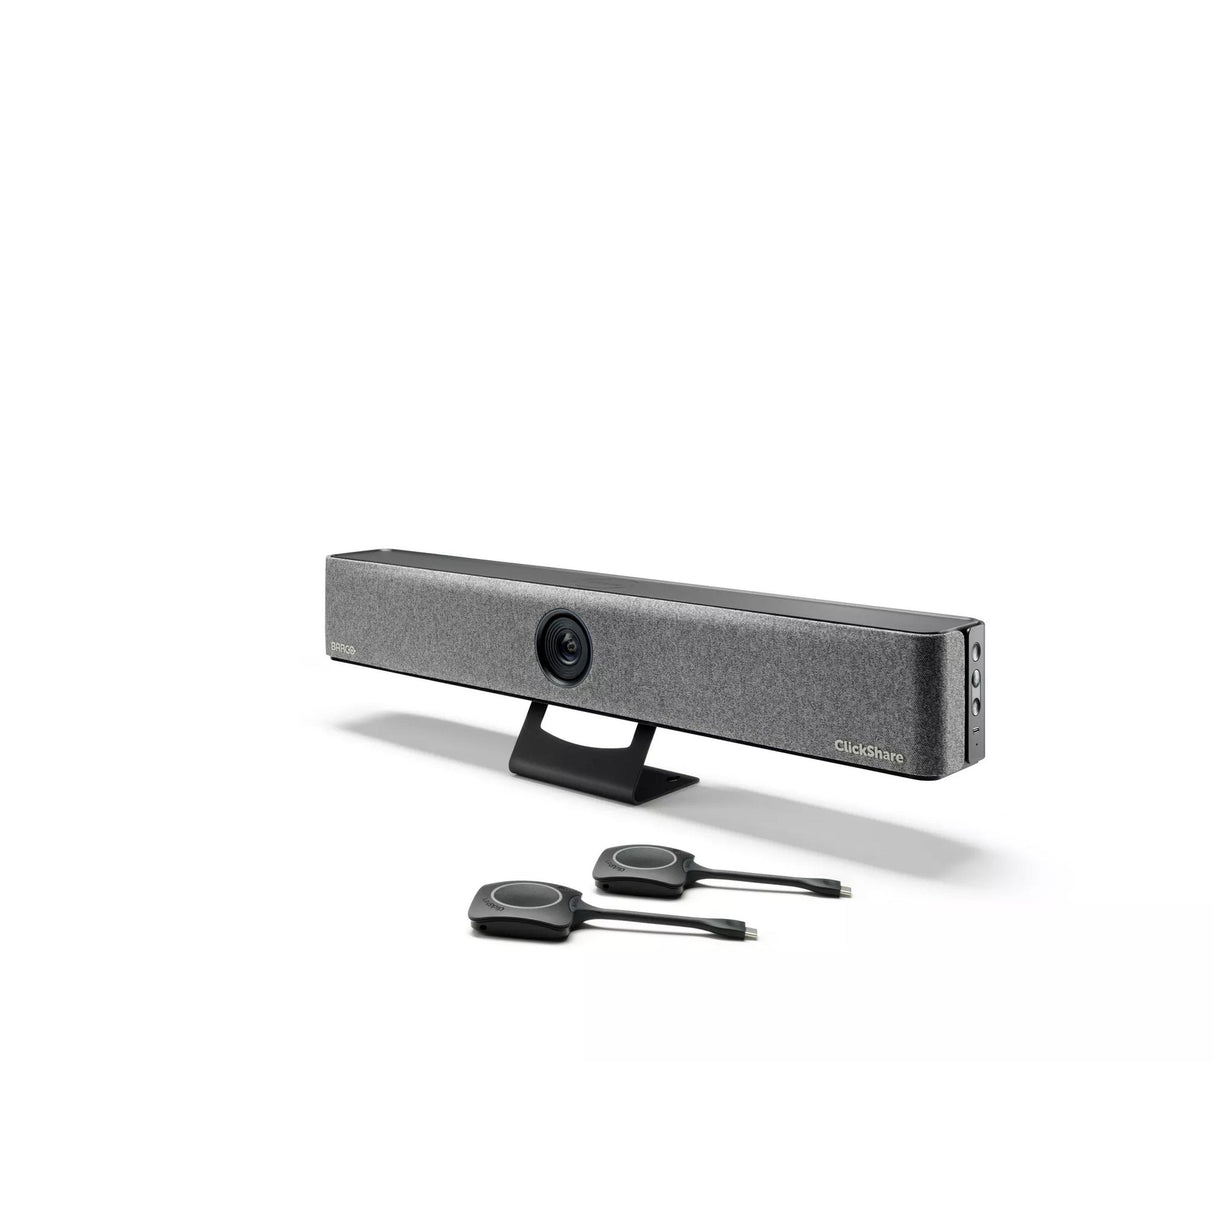 Barco ClickShare Bar Pro Wireless Video Conferencing Bar with 4K Content Sharing (2 Buttons Included)